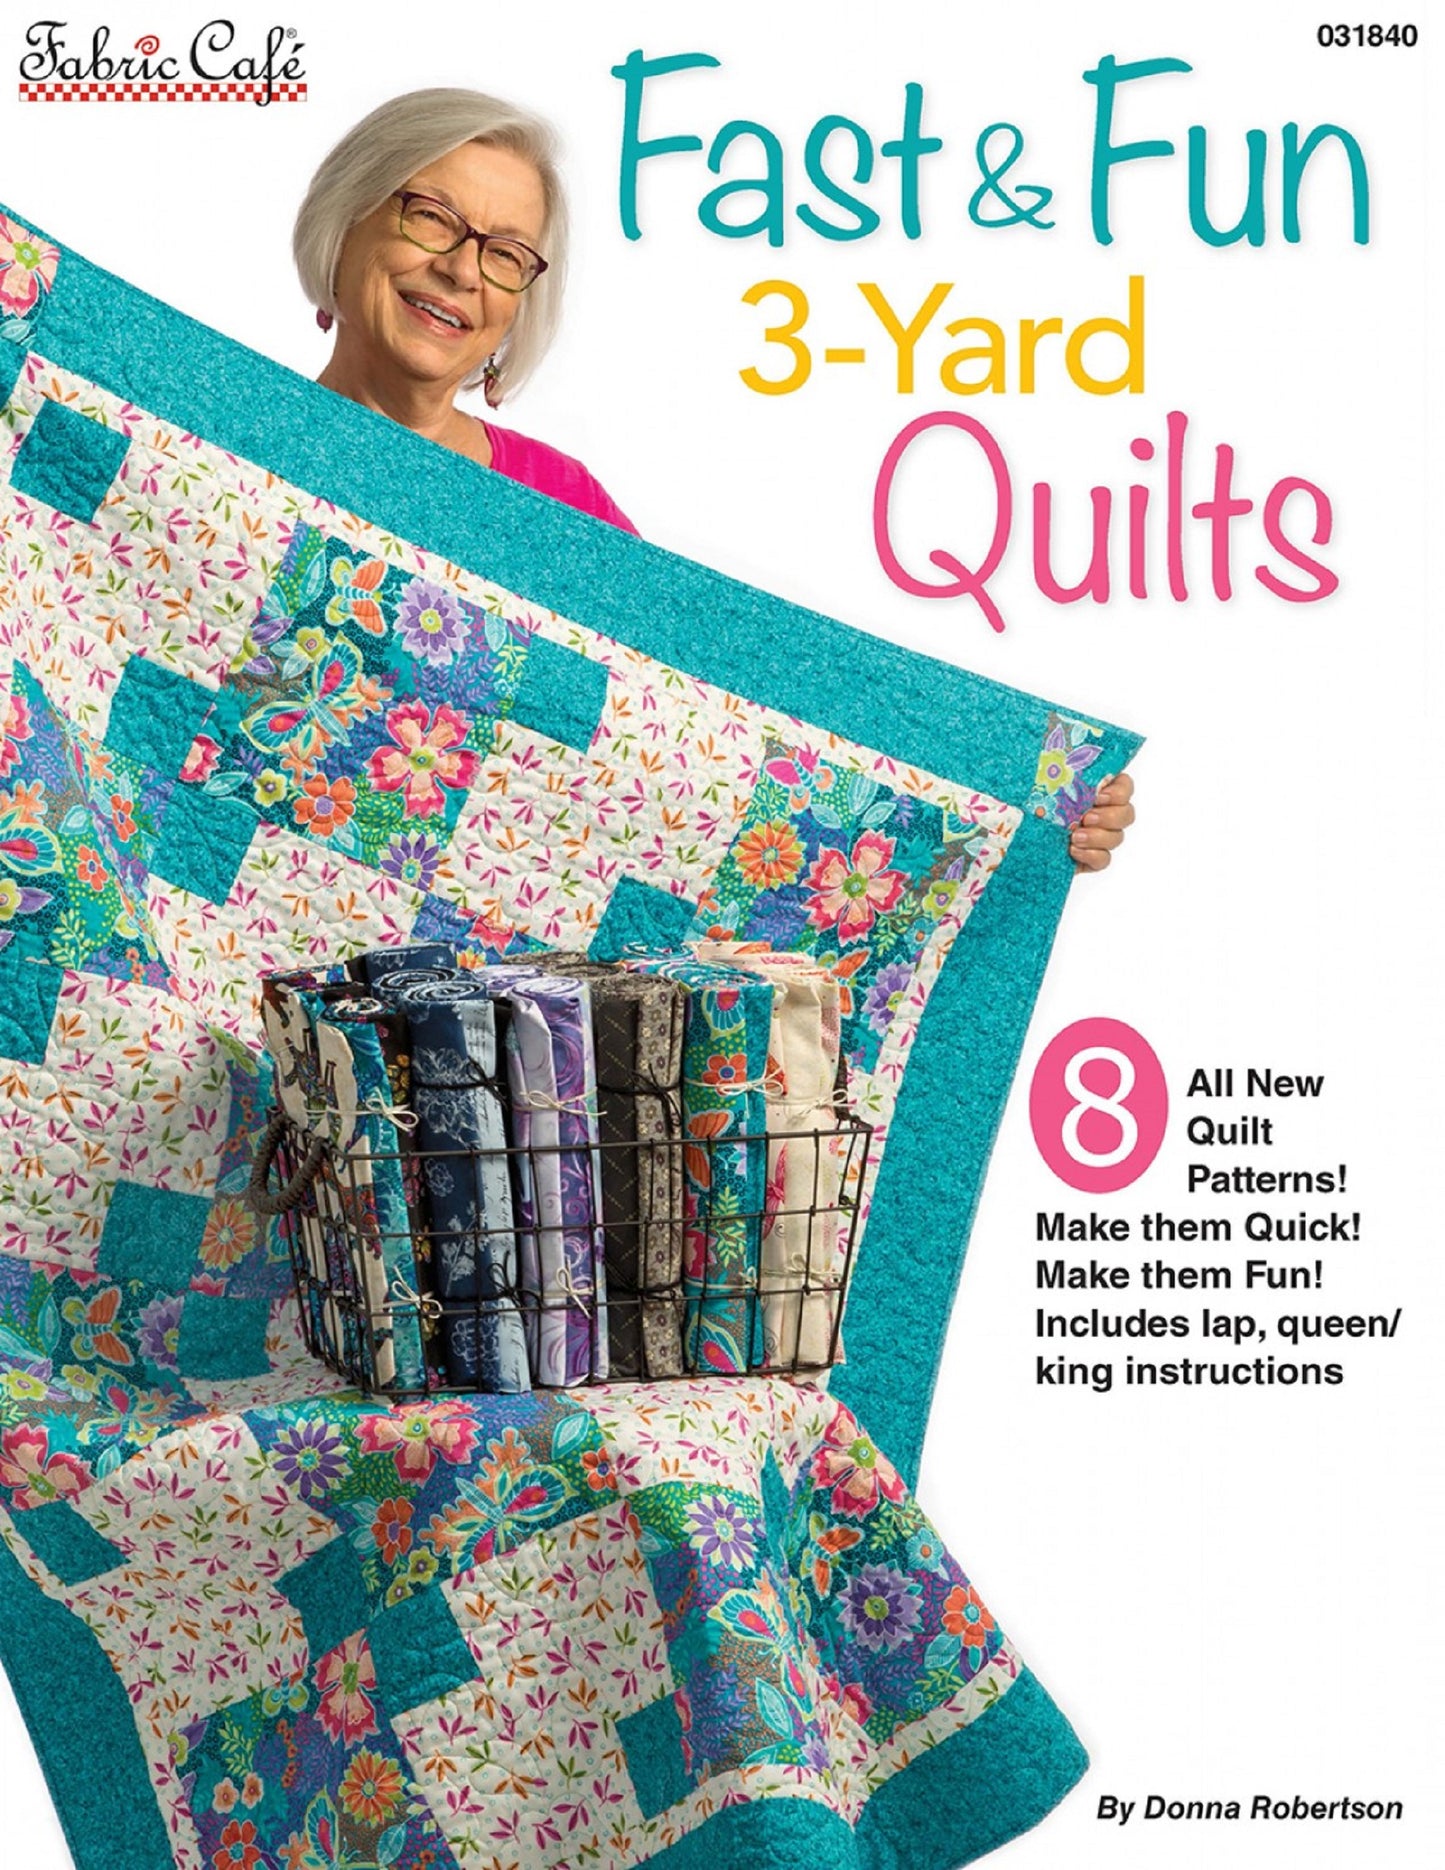 Fast and Fun 3-Yard Quilts-8 Patterns-Lap, Queen, King